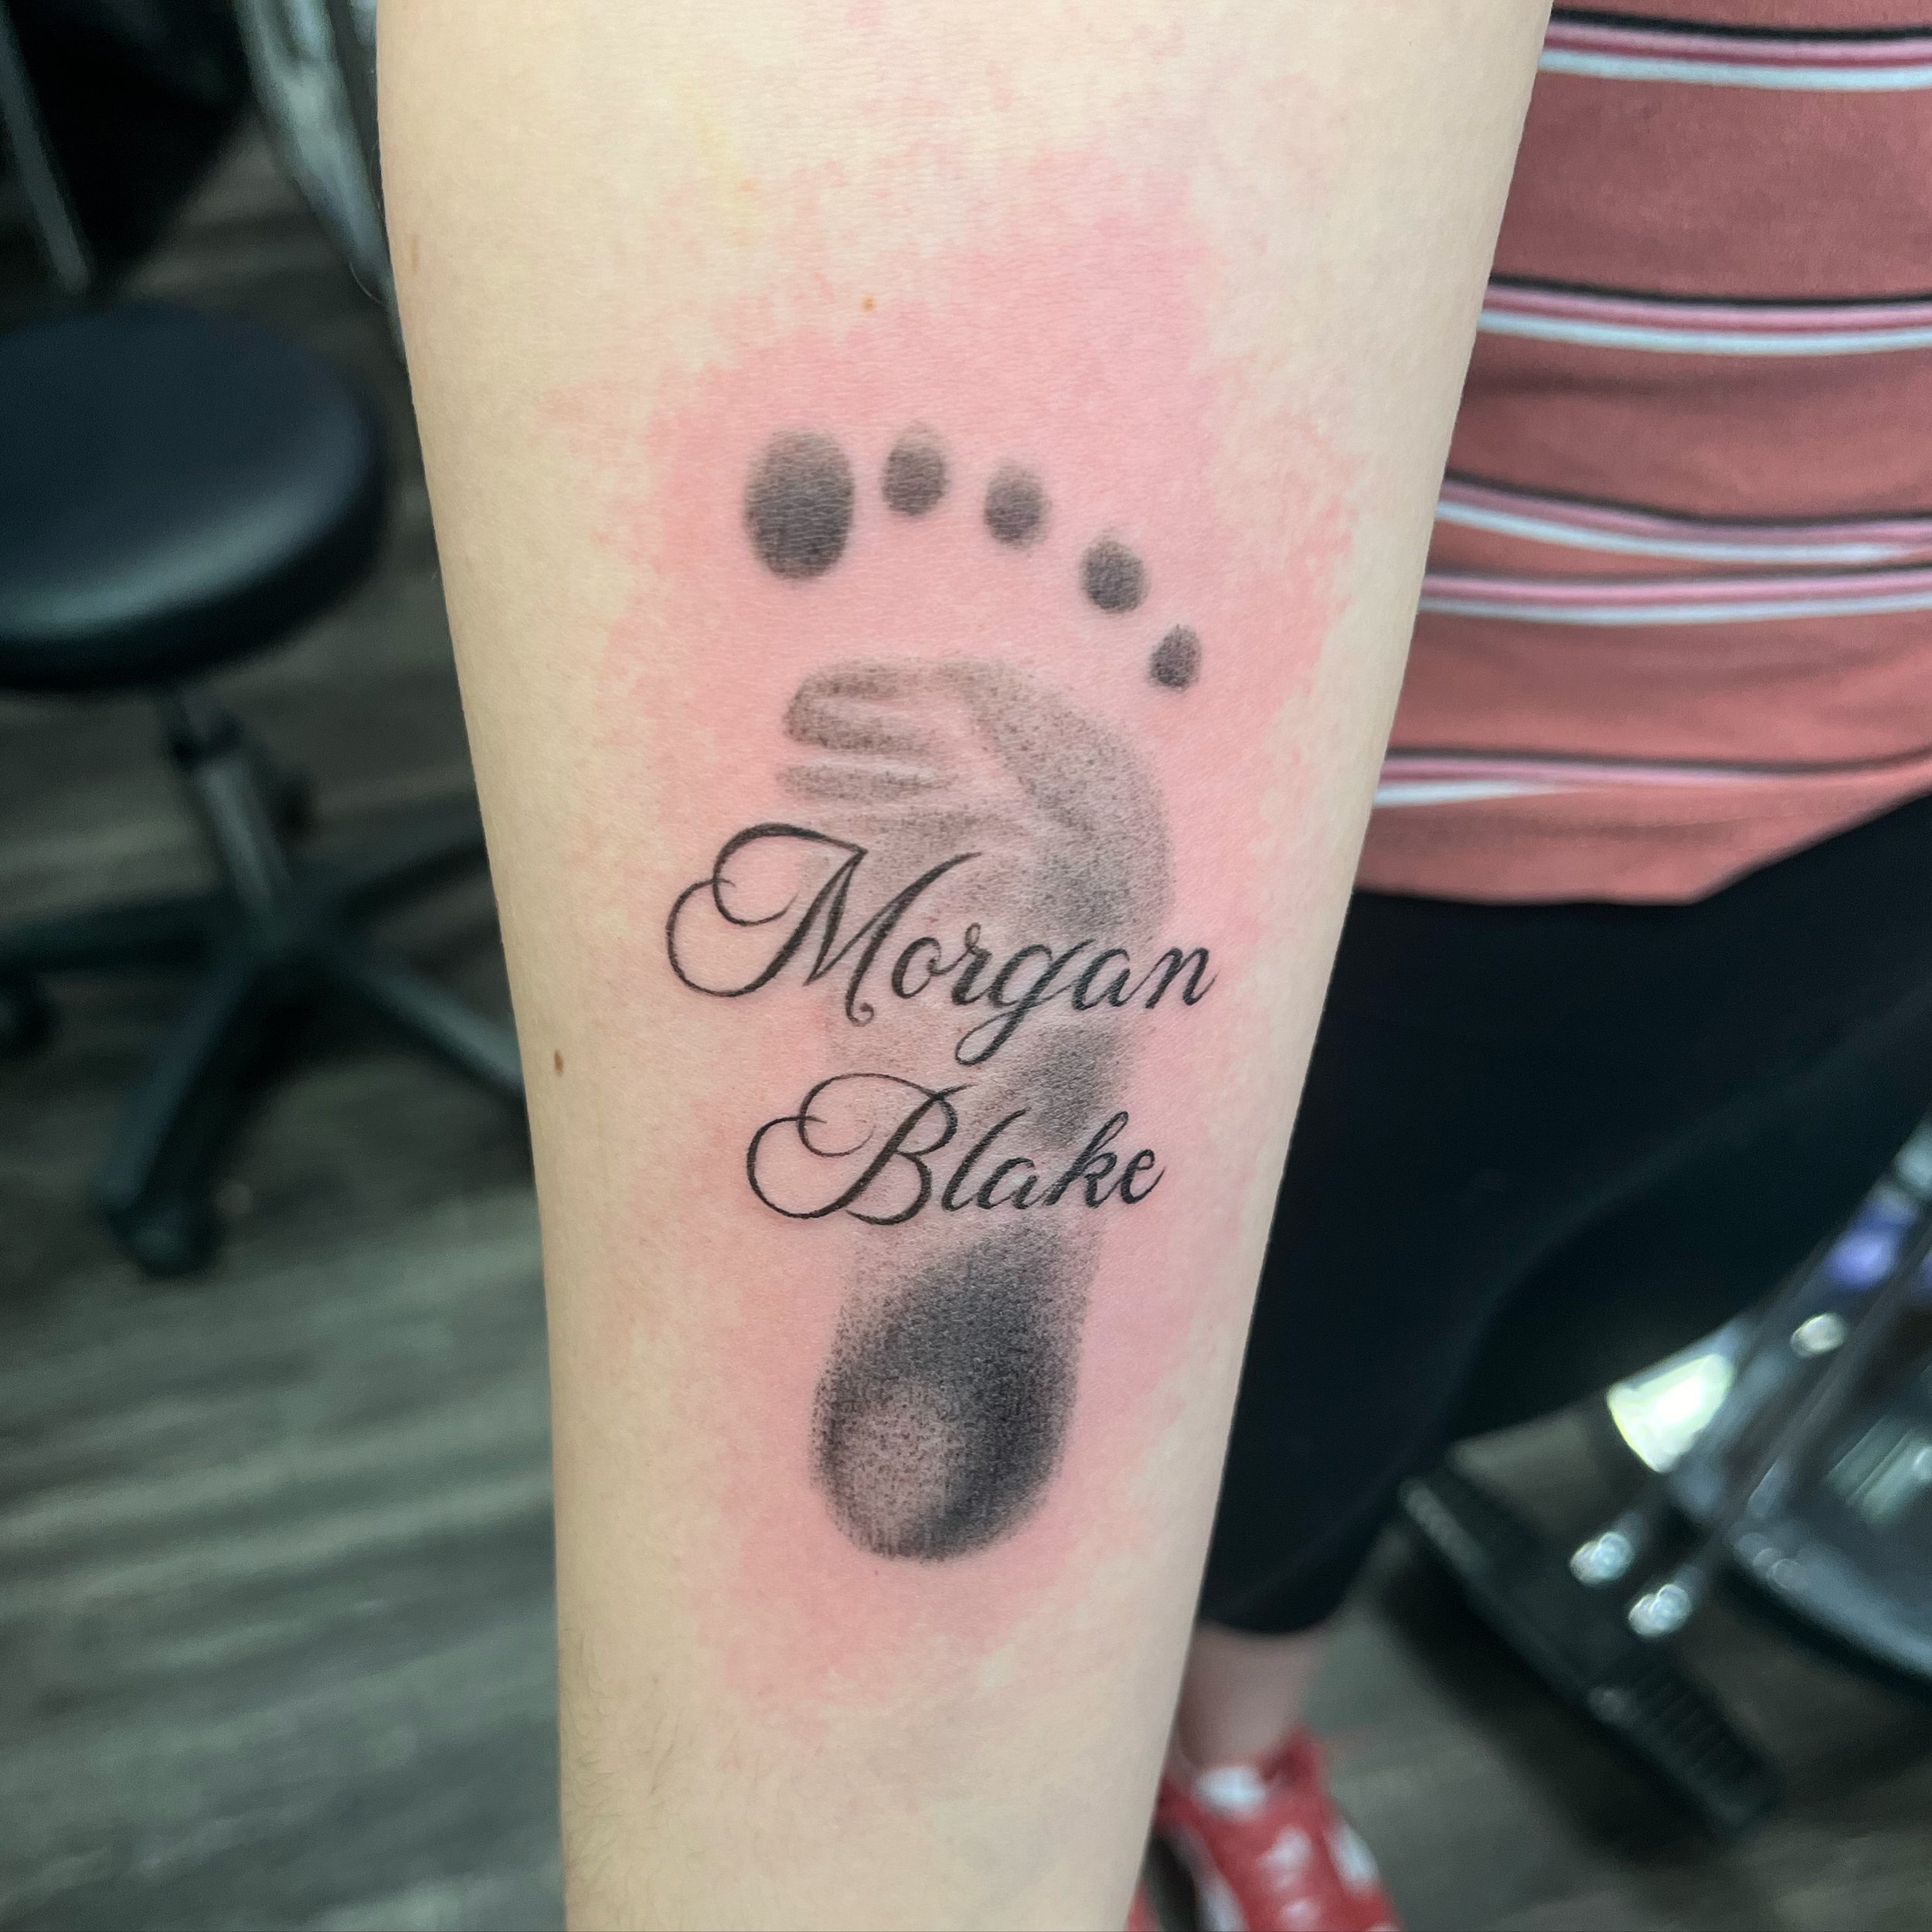 Foot print done by @blackinklinearts today 🤗
Soh has bookings available in May. DM us or call for availability. 
.
.
.
#realism #realistictattoo #realismtattoo #footprint #footprinttattoo #fineline #artofinstagram #artoftheday  #tattooartist #tattoo